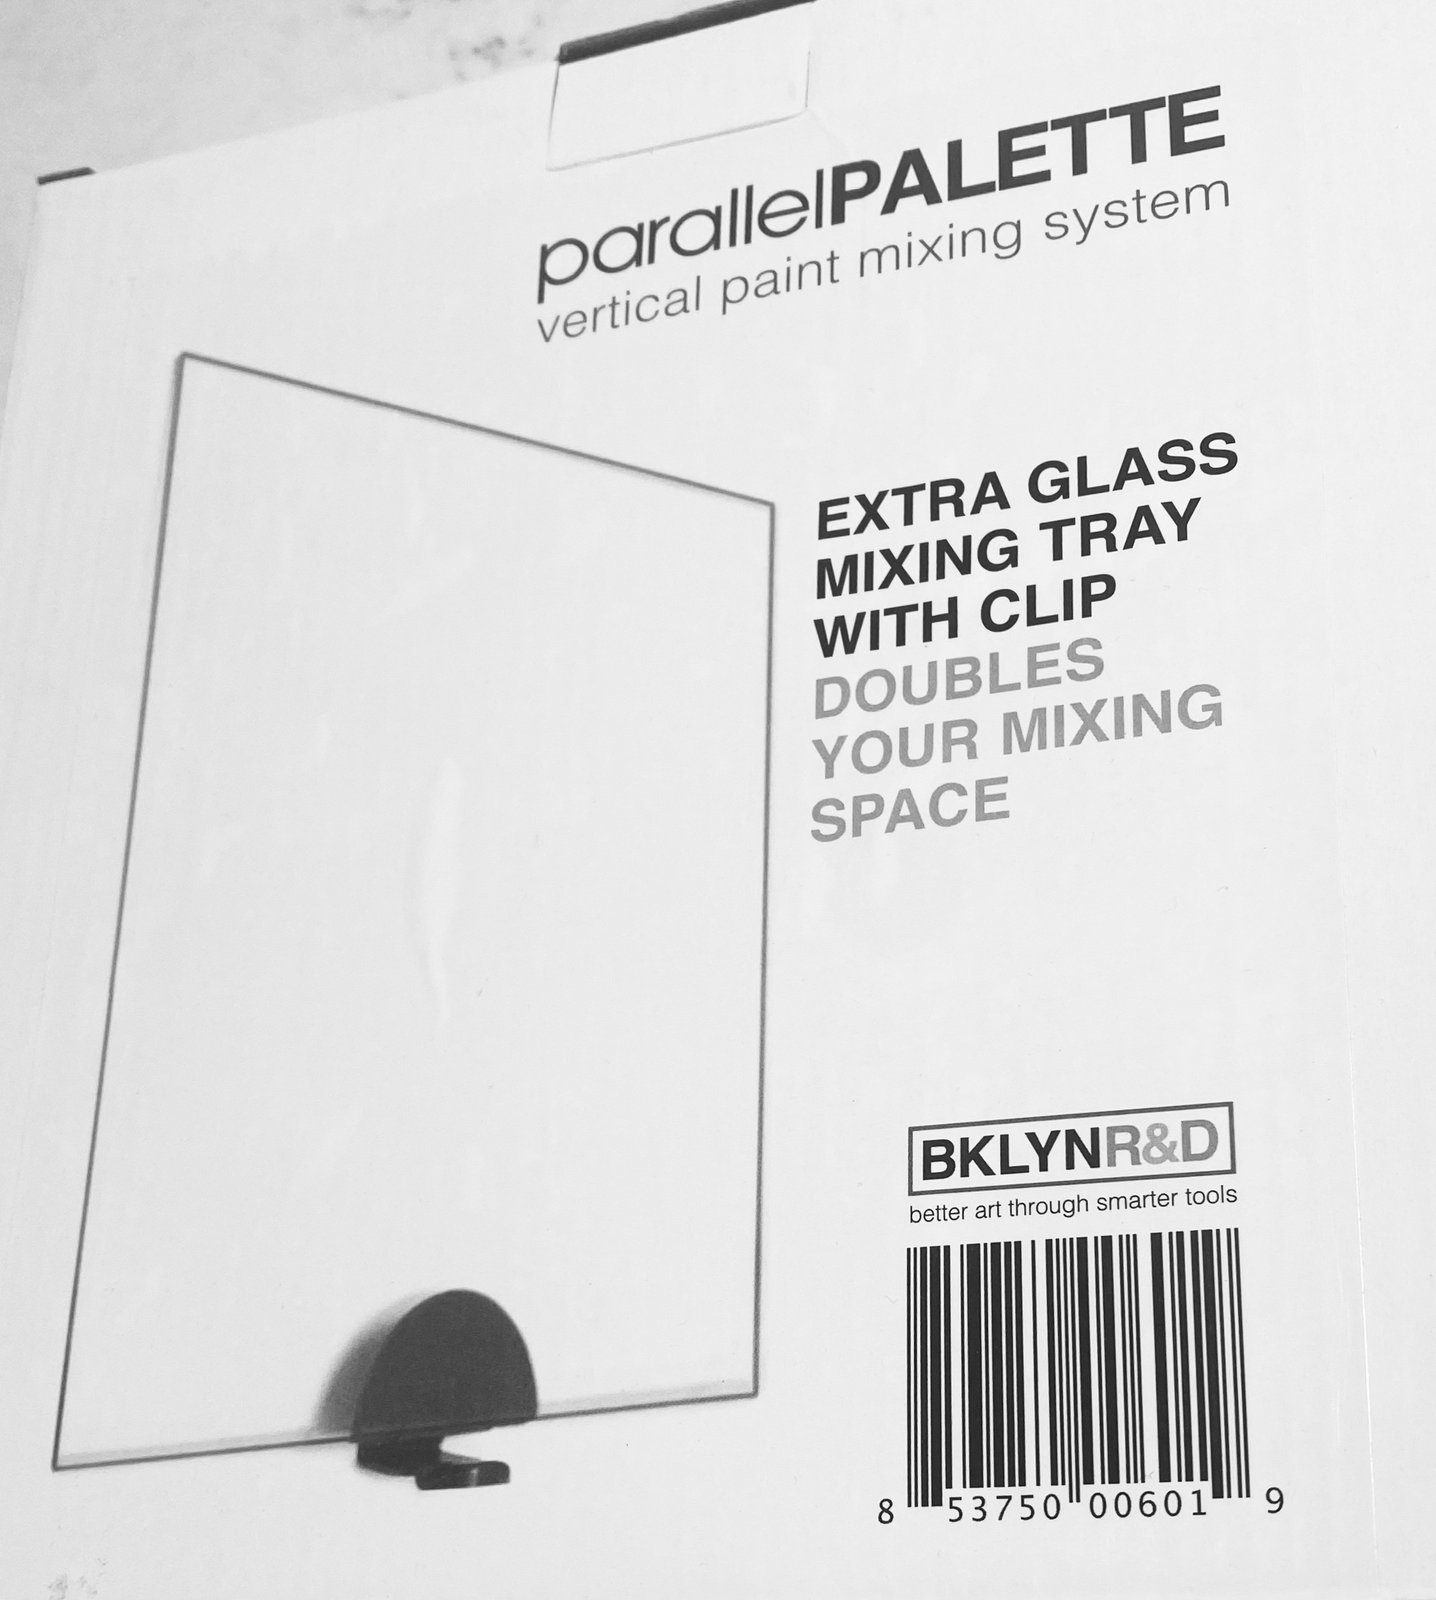 Replacement Glass - Parallel Palette